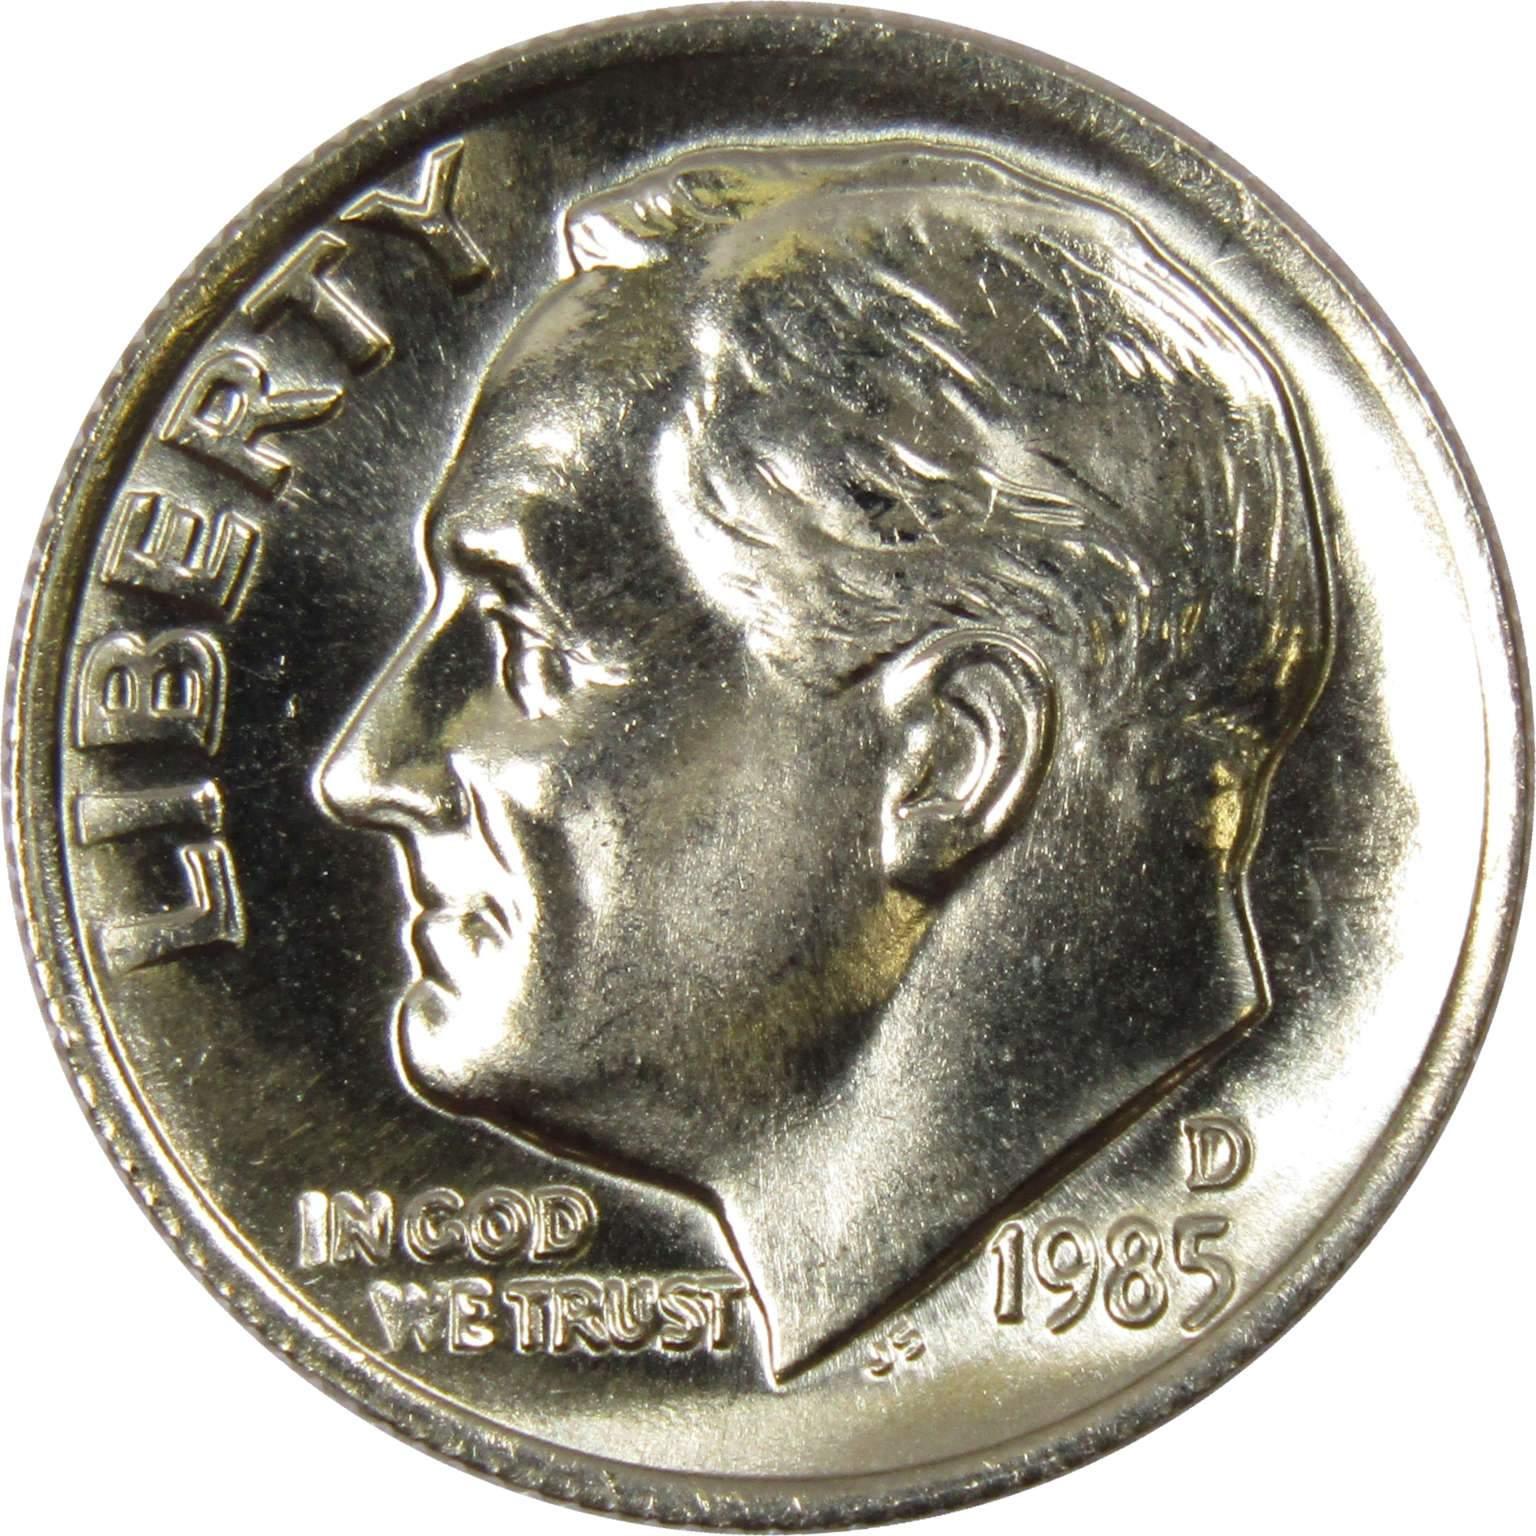 1985 D Roosevelt Dime BU Uncirculated Mint State 10c US Coin Collectible